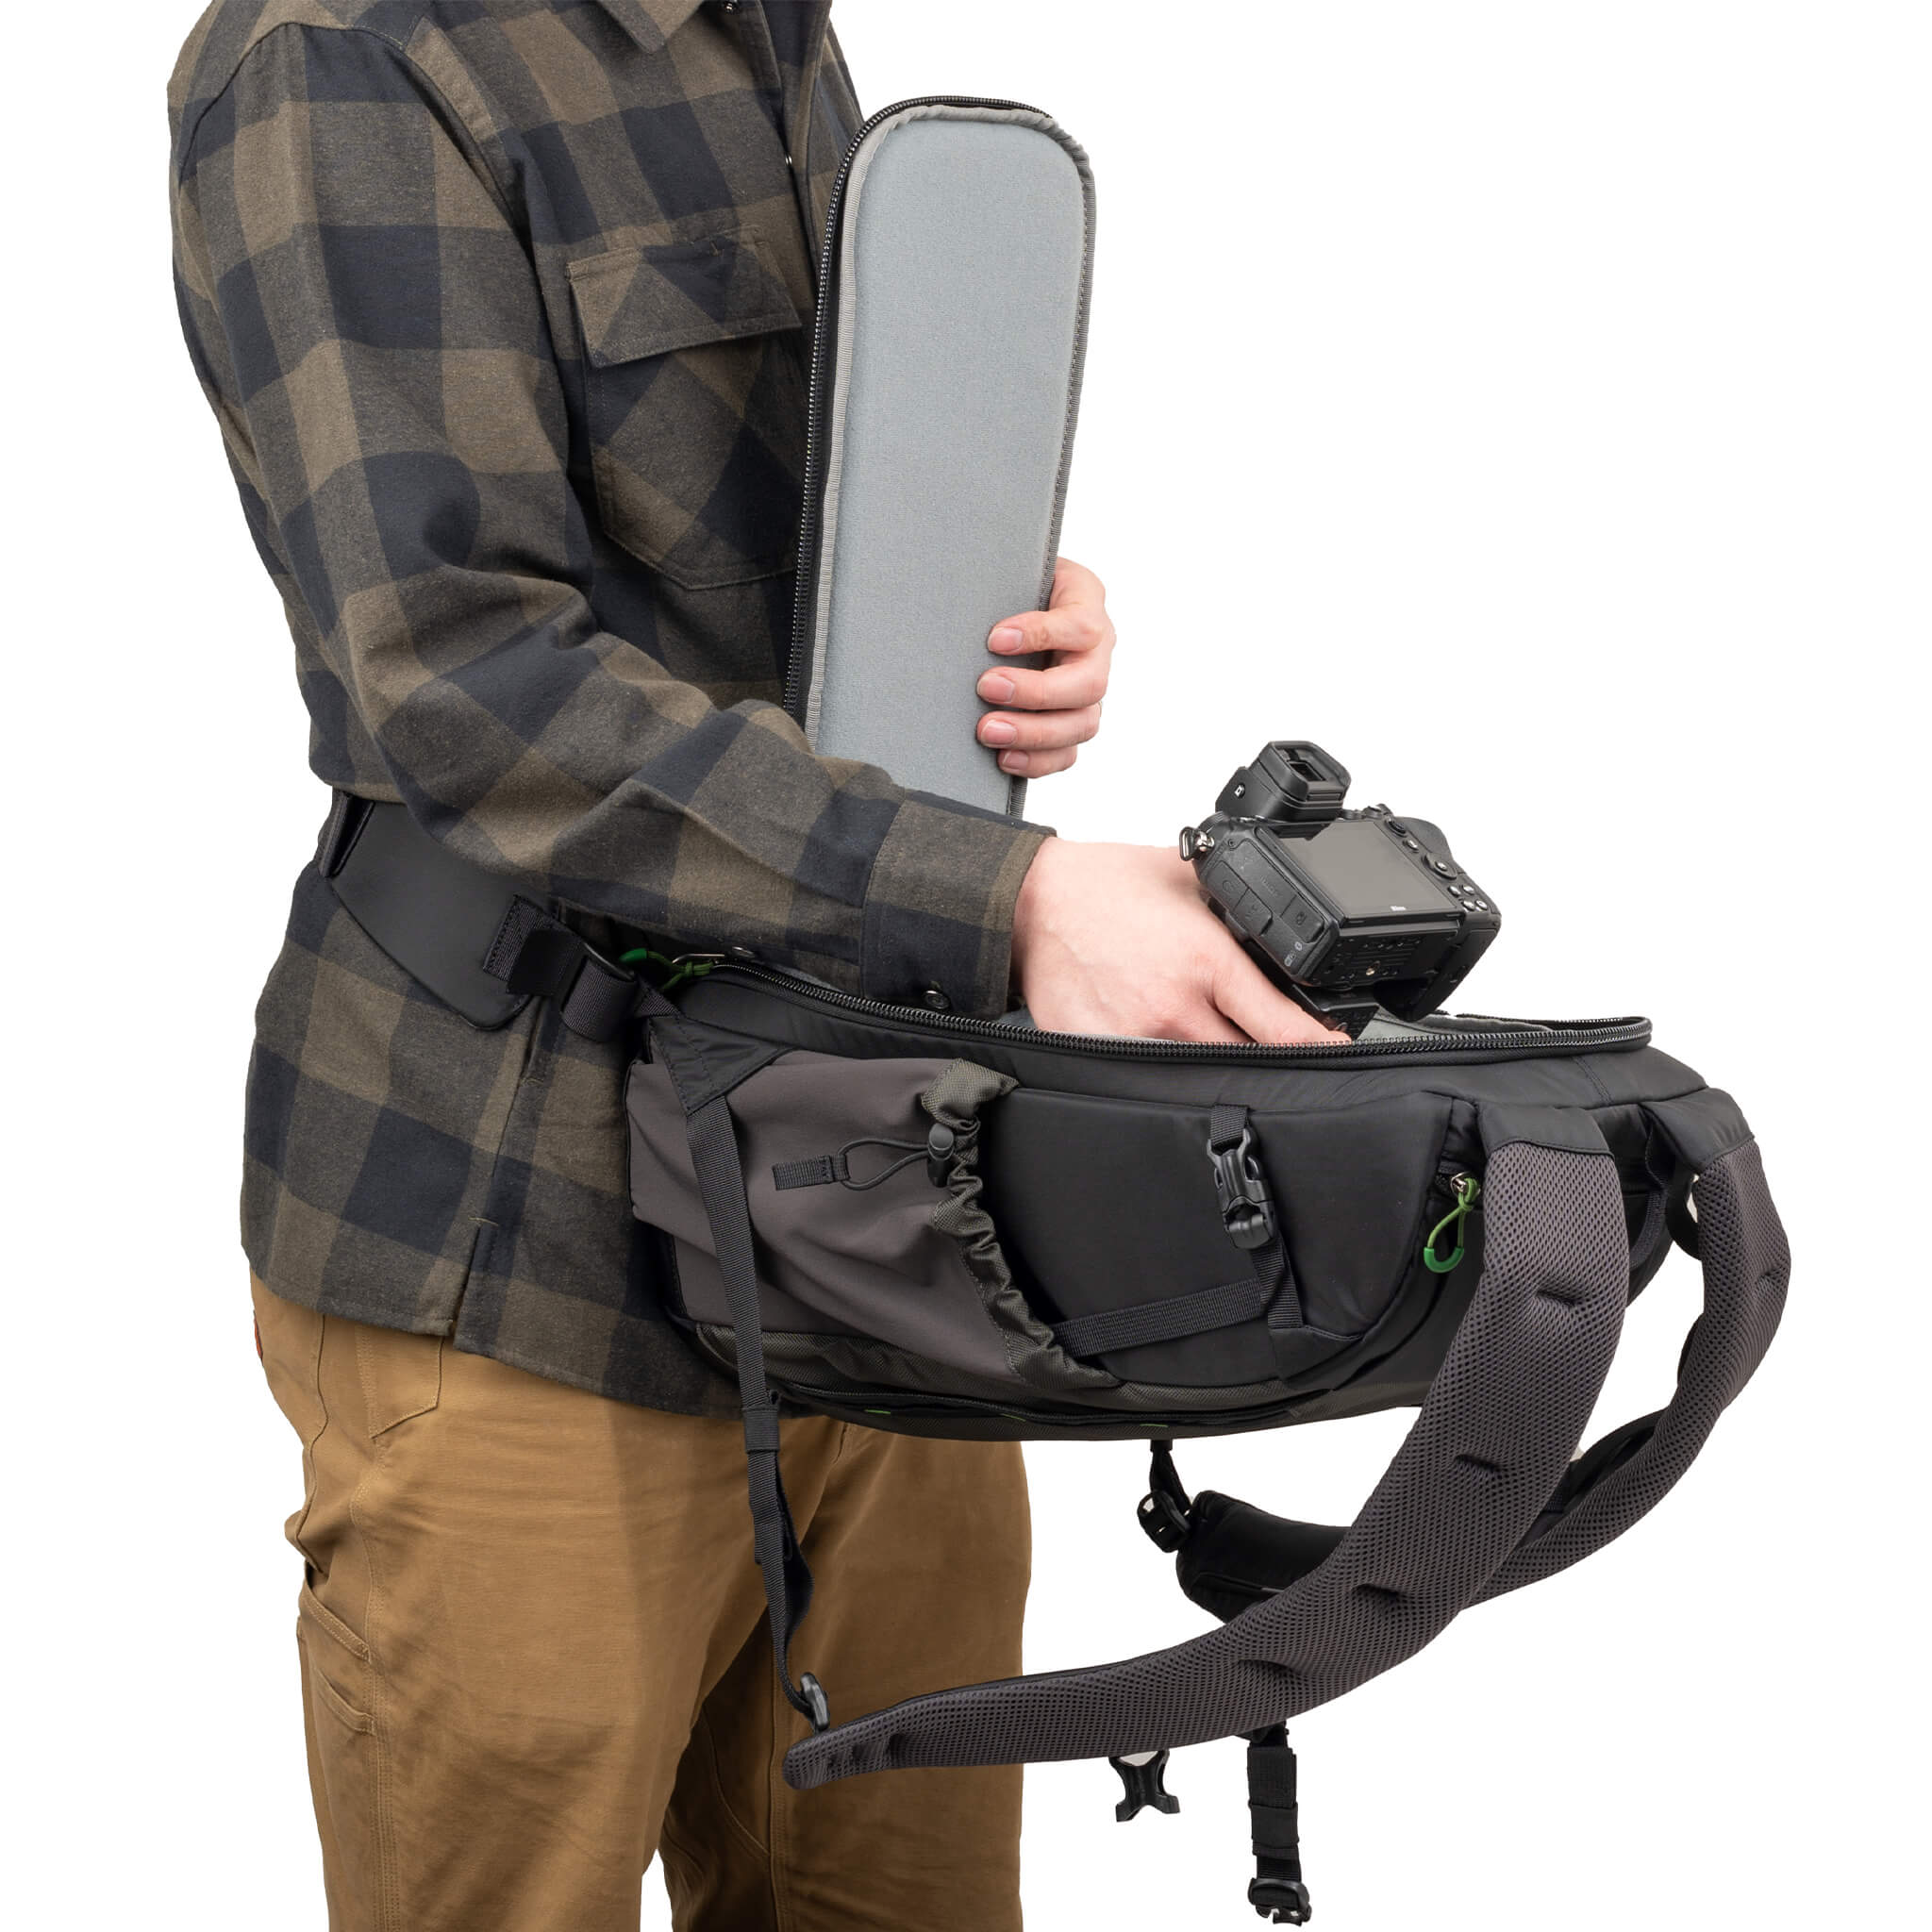 Back-panel access to your camera gear without taking the bag off